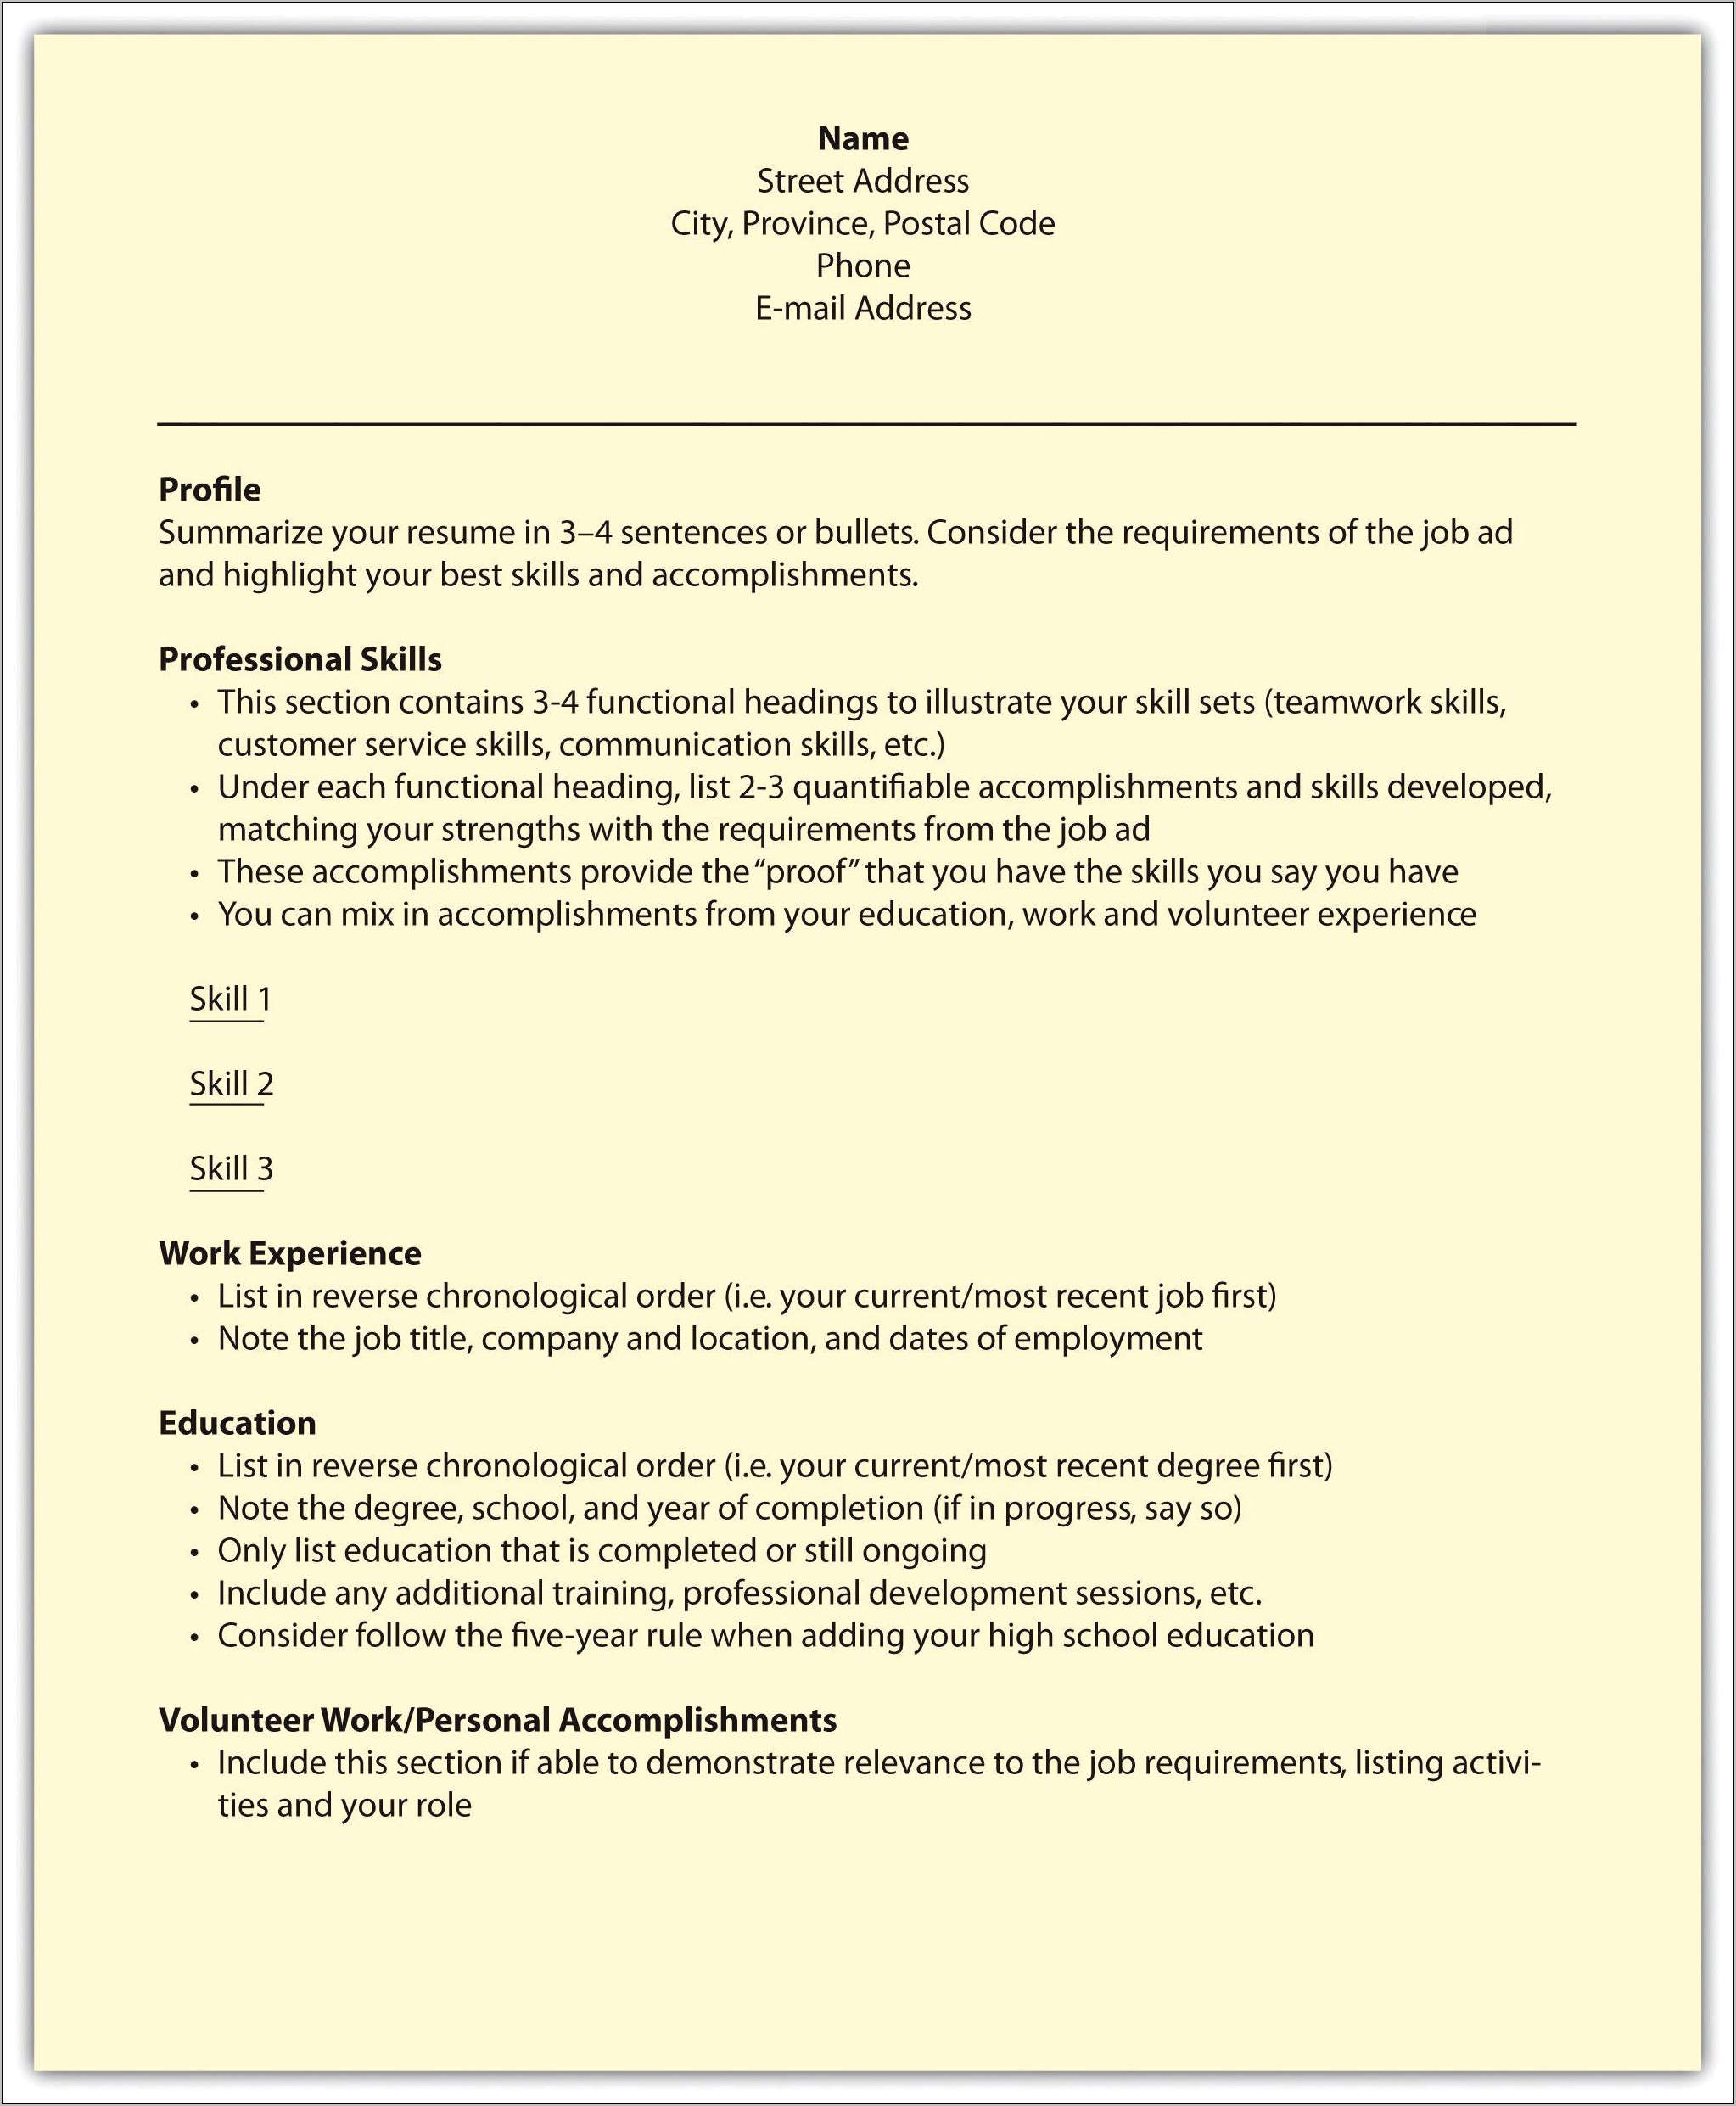 Example Cover Letter For Packaging Resume